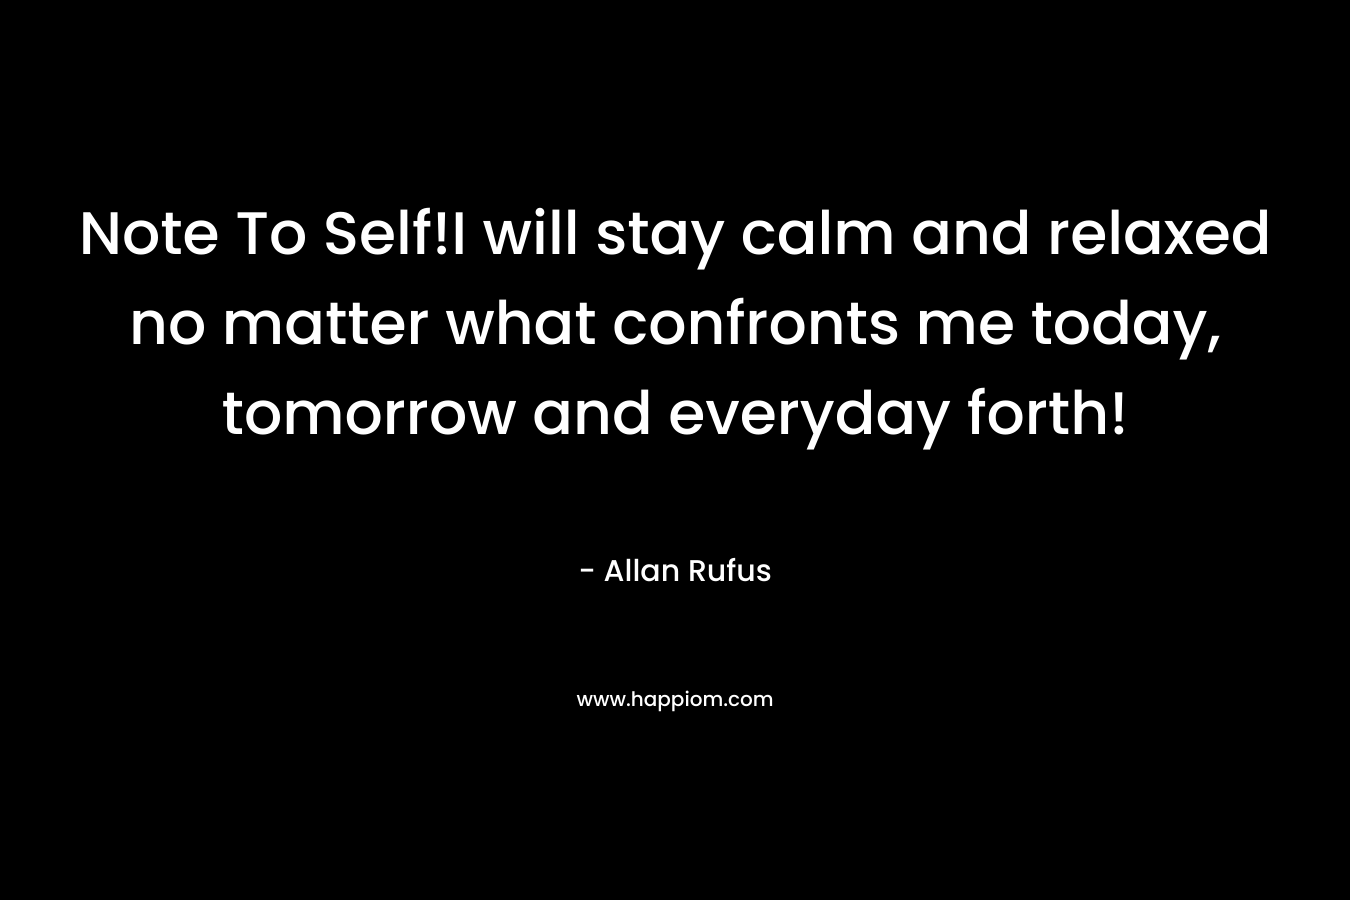 Note To Self!I will stay calm and relaxed no matter what confronts me today, tomorrow and everyday forth! – Allan Rufus